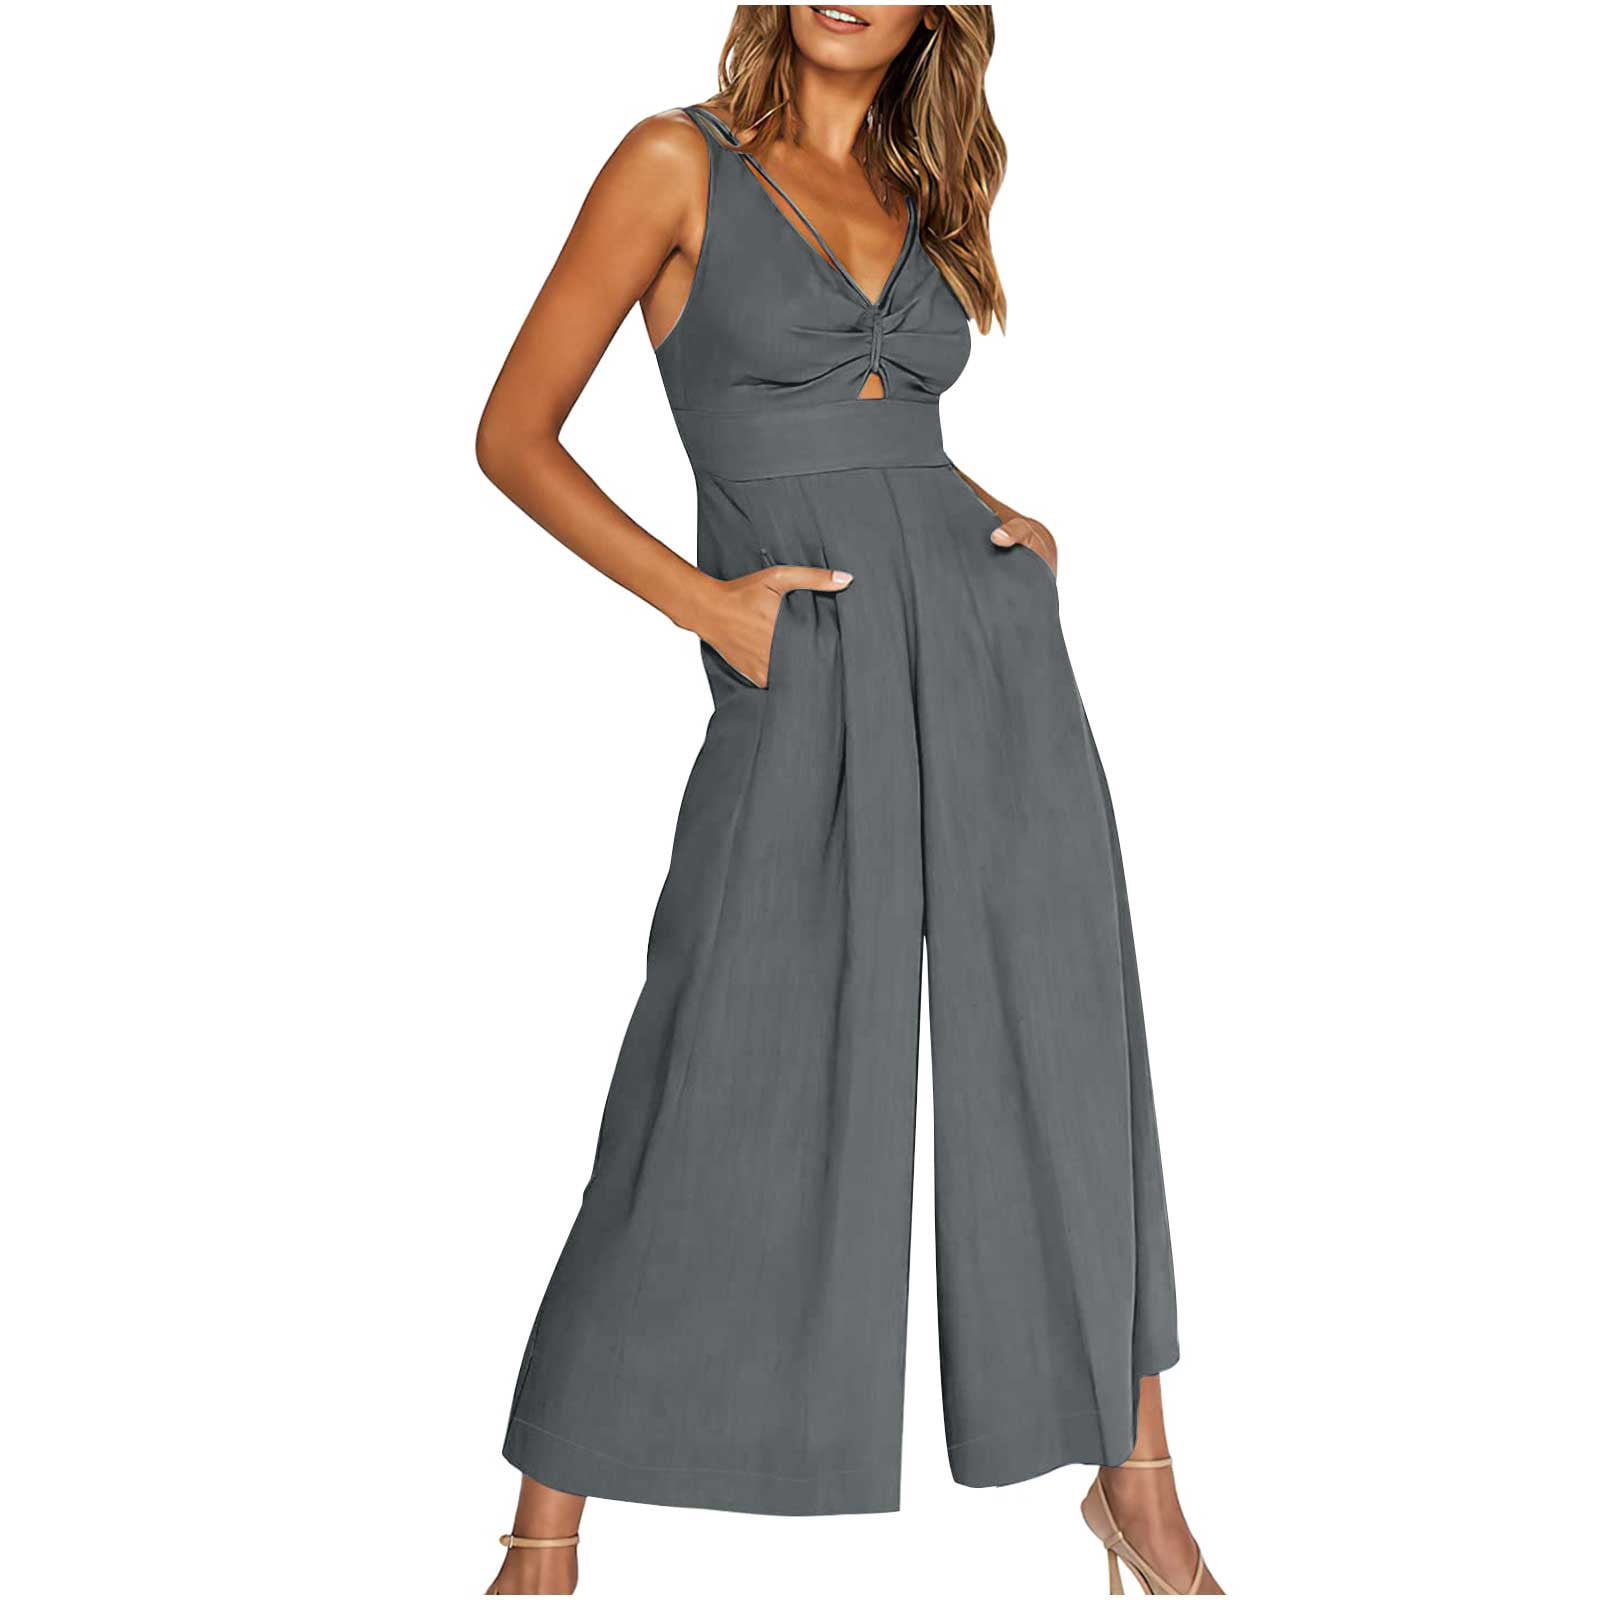 Women's Summer Wide leg Jumpsuits V Neck Smocked Cut Out High Waist Overalls  Adjustable Straps Rompers With Pockets 